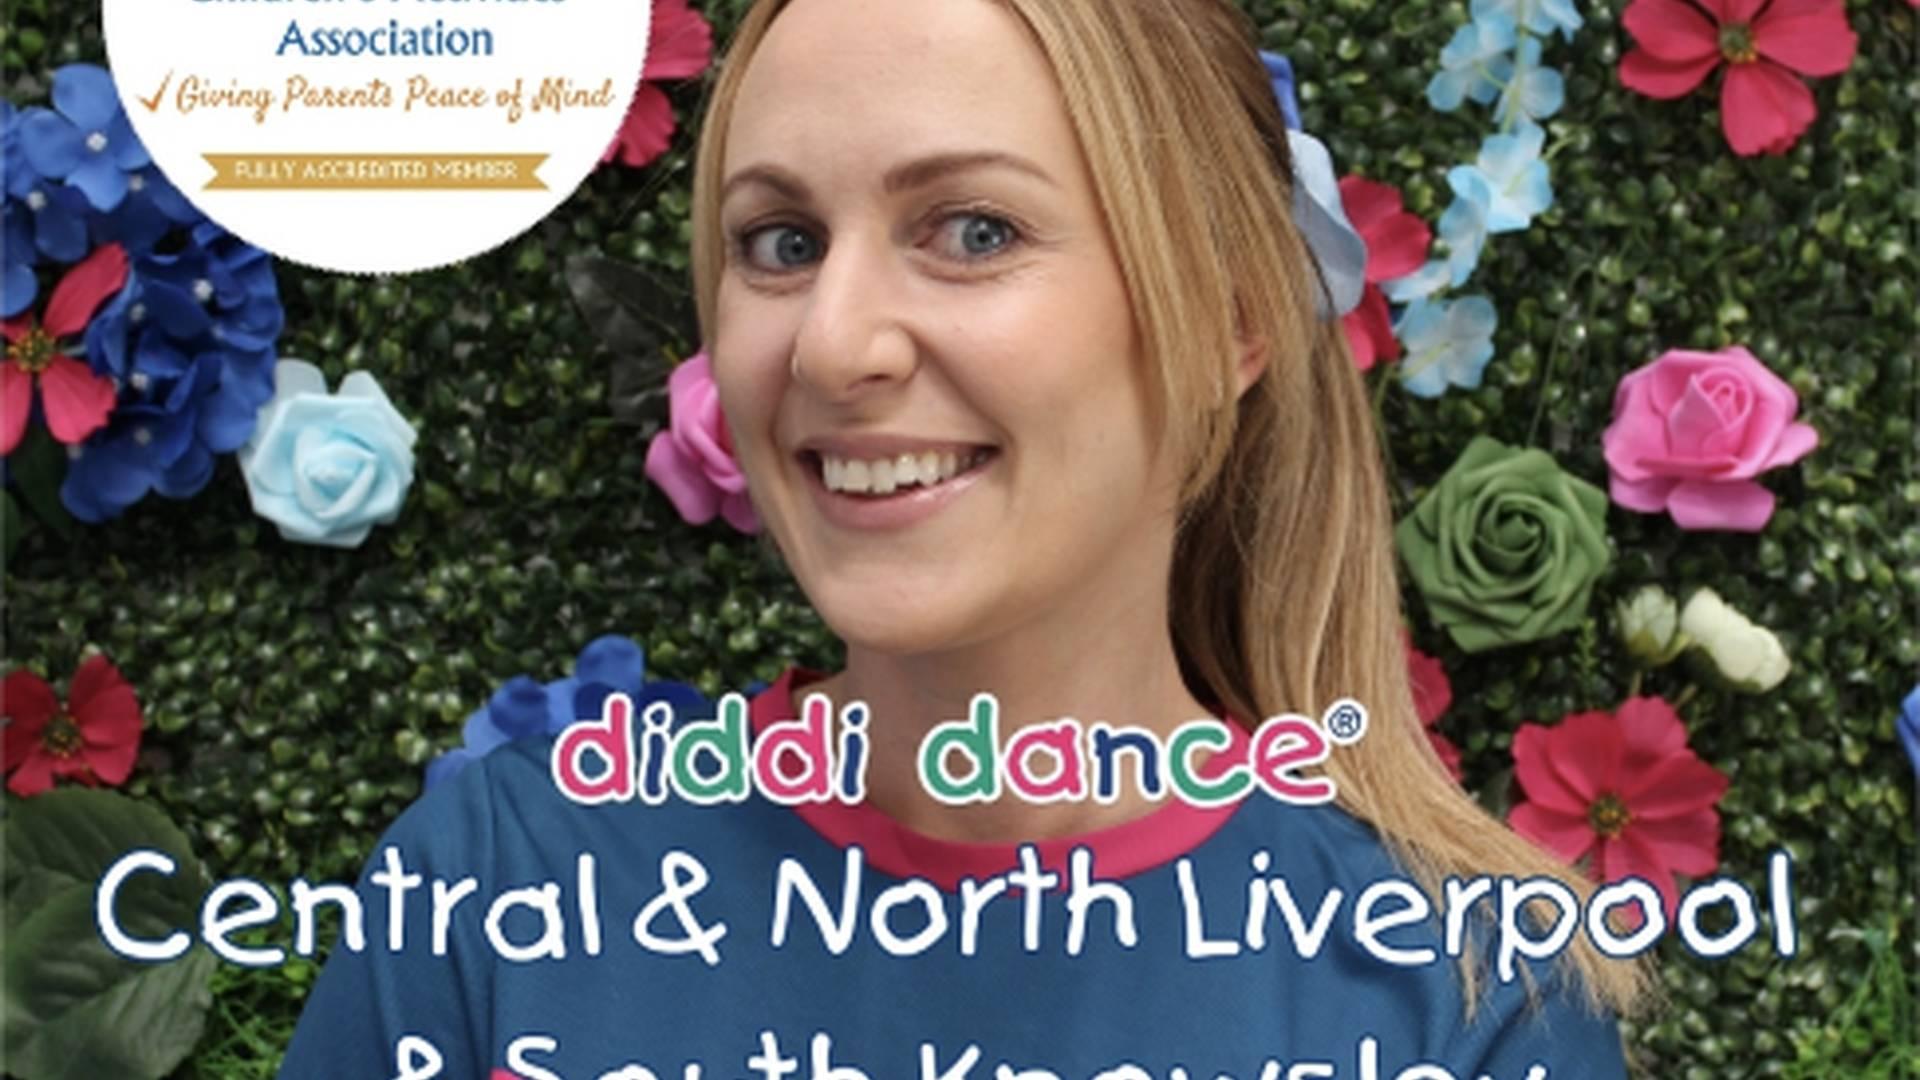 diddi dance Central & North Liverpool & South Knowsley photo